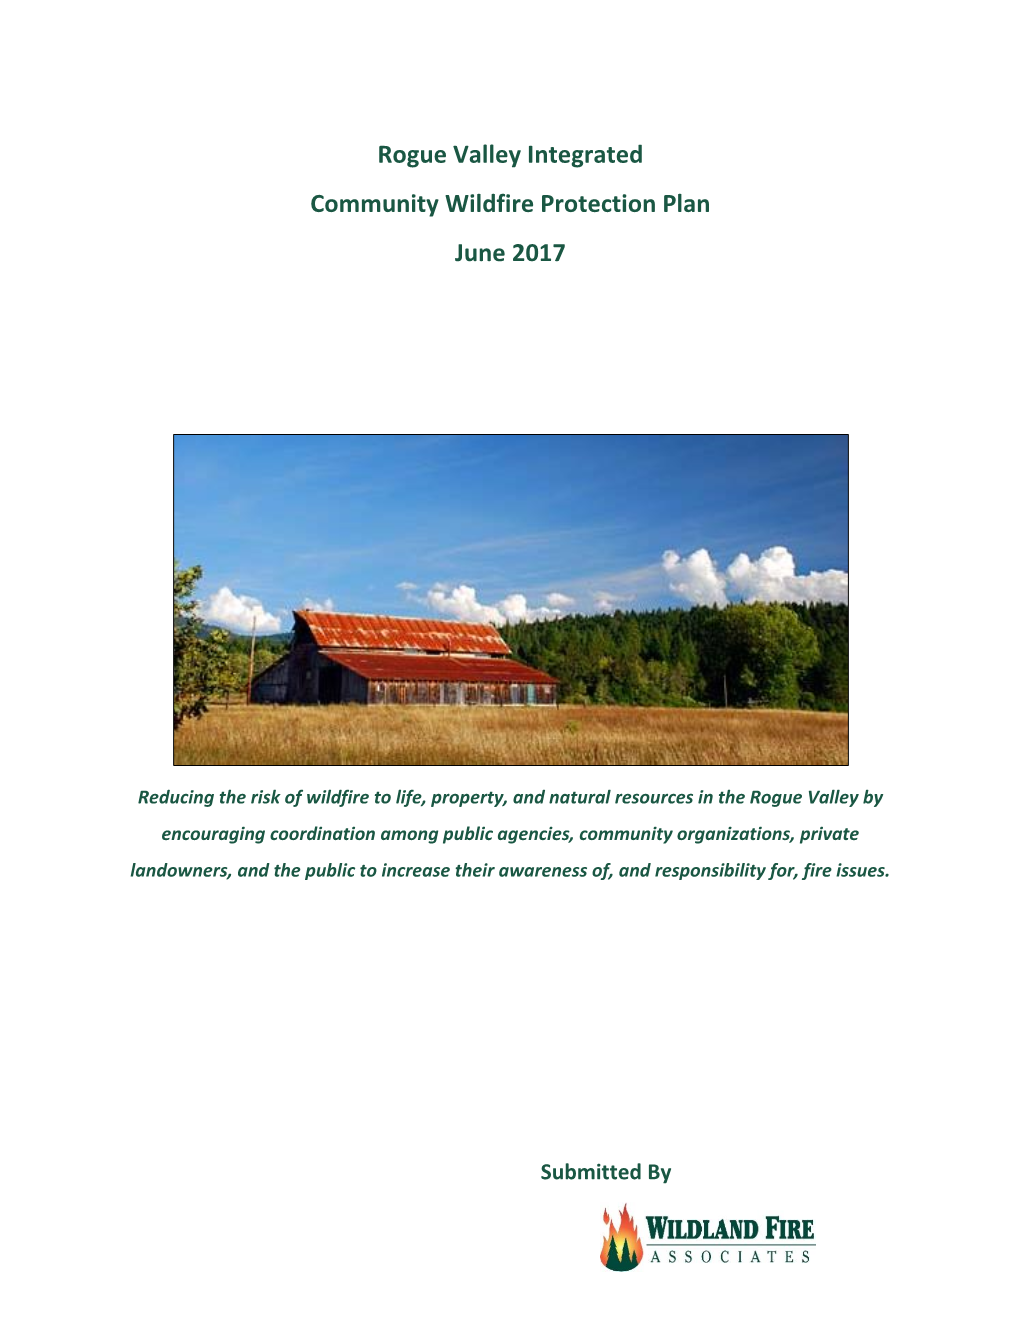 Rogue Valley Integrated Community Wildfire Protection Plan June 2017